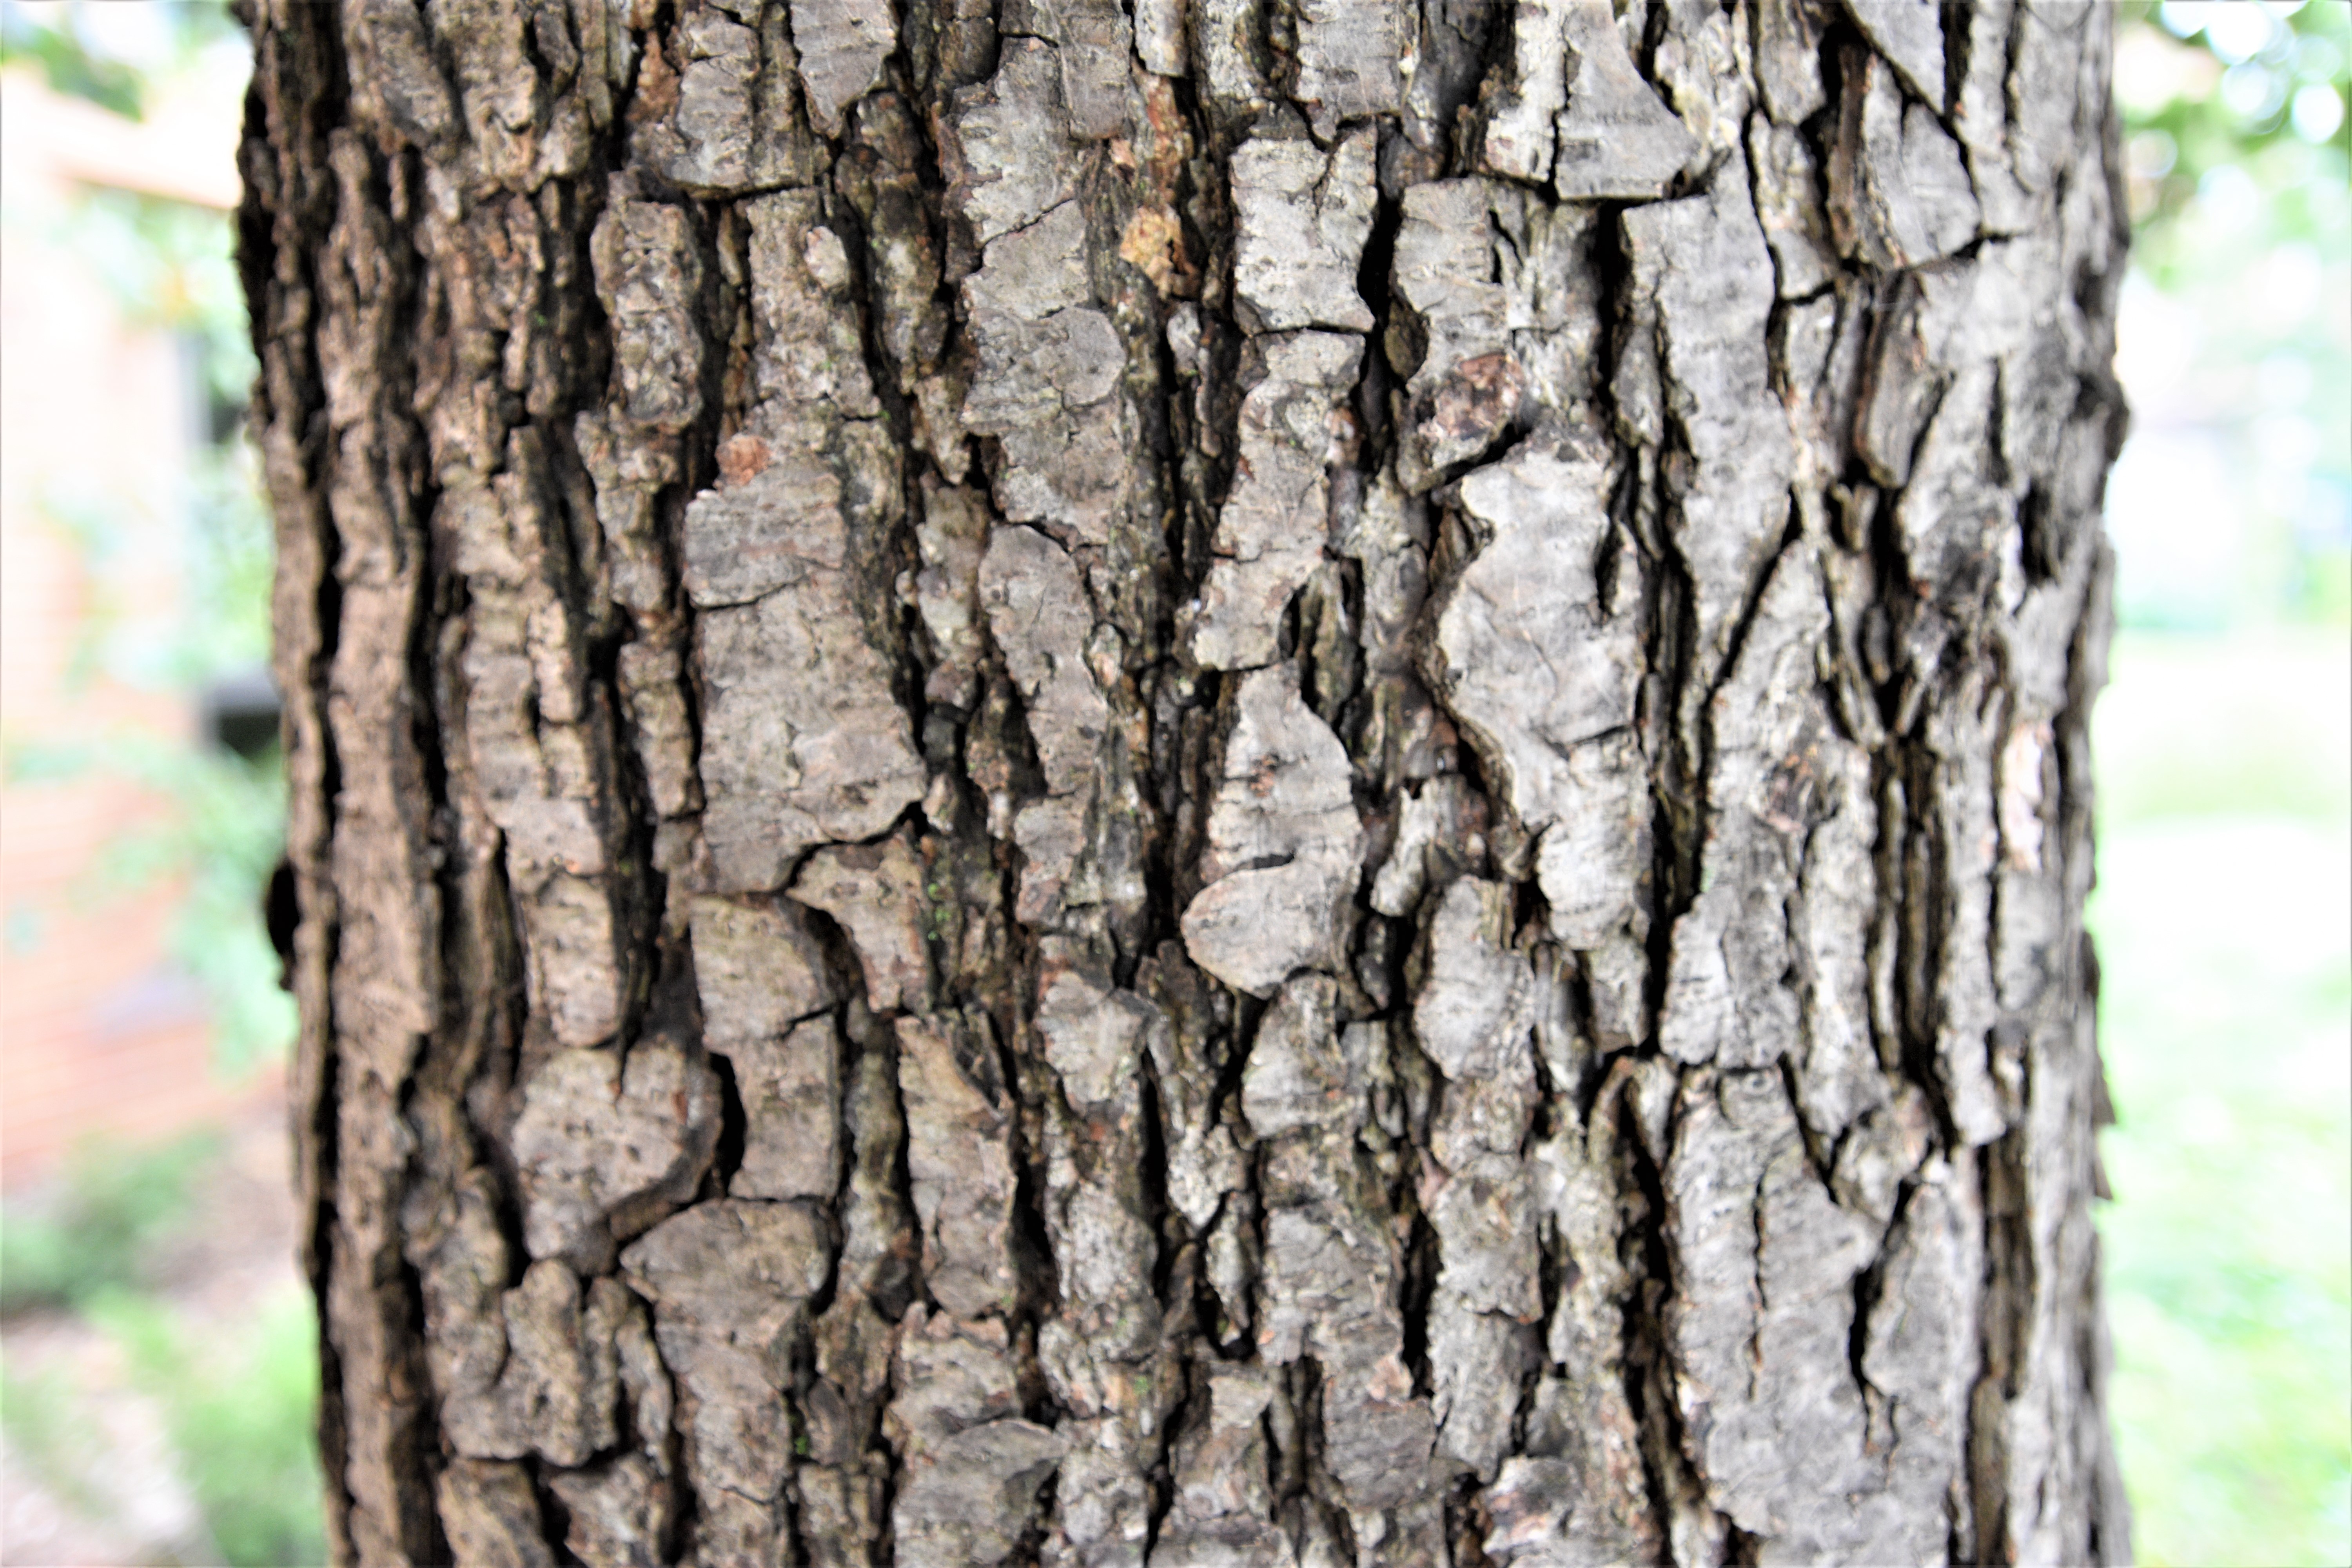 Picture of bark with shallow cracks that run horizontaly.